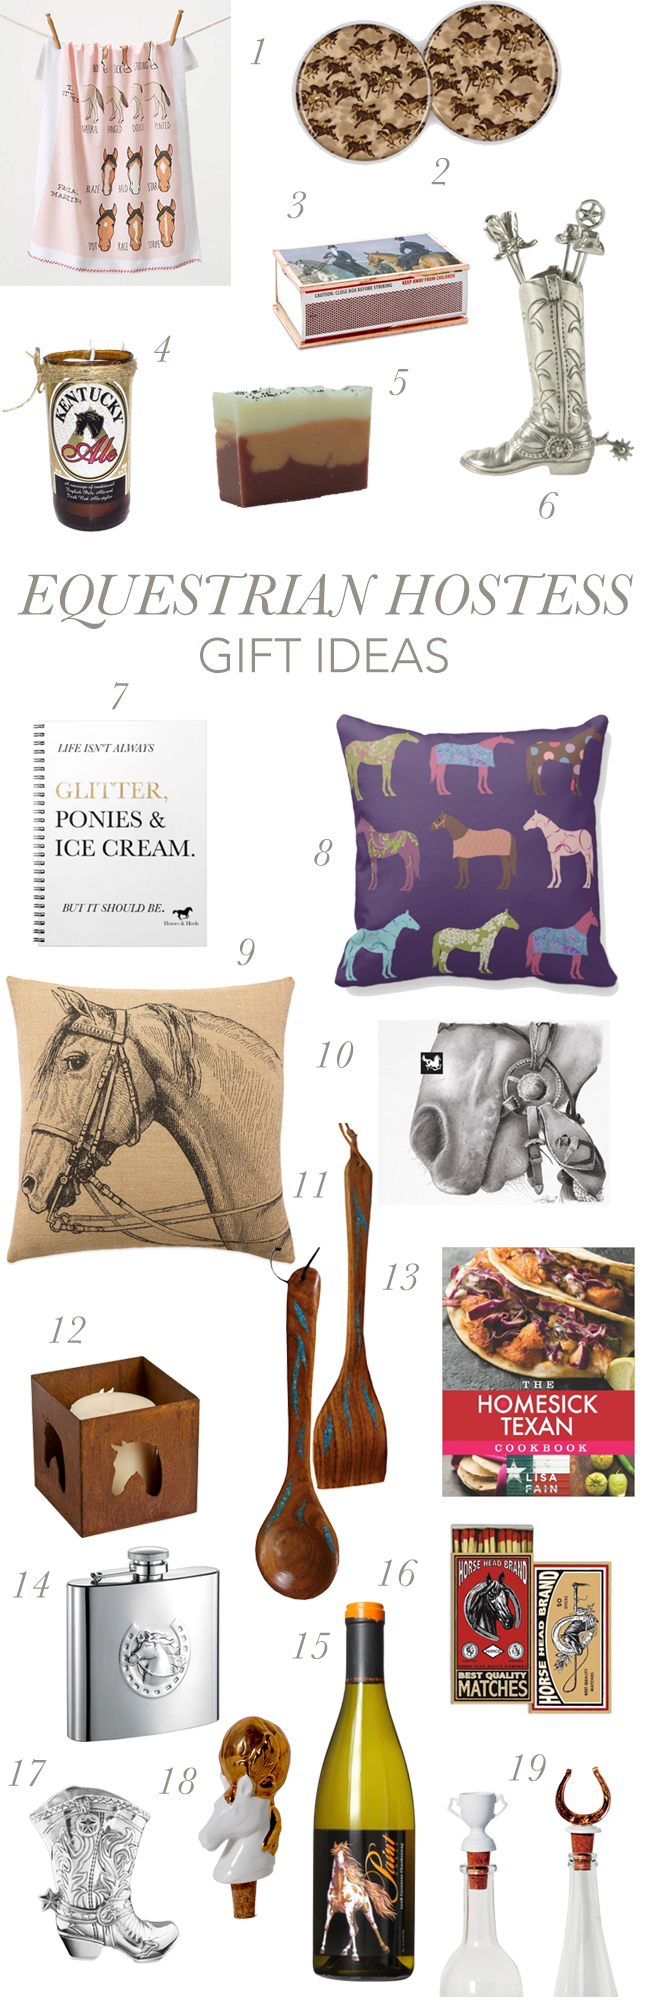 Equestrian Hostess Gifts